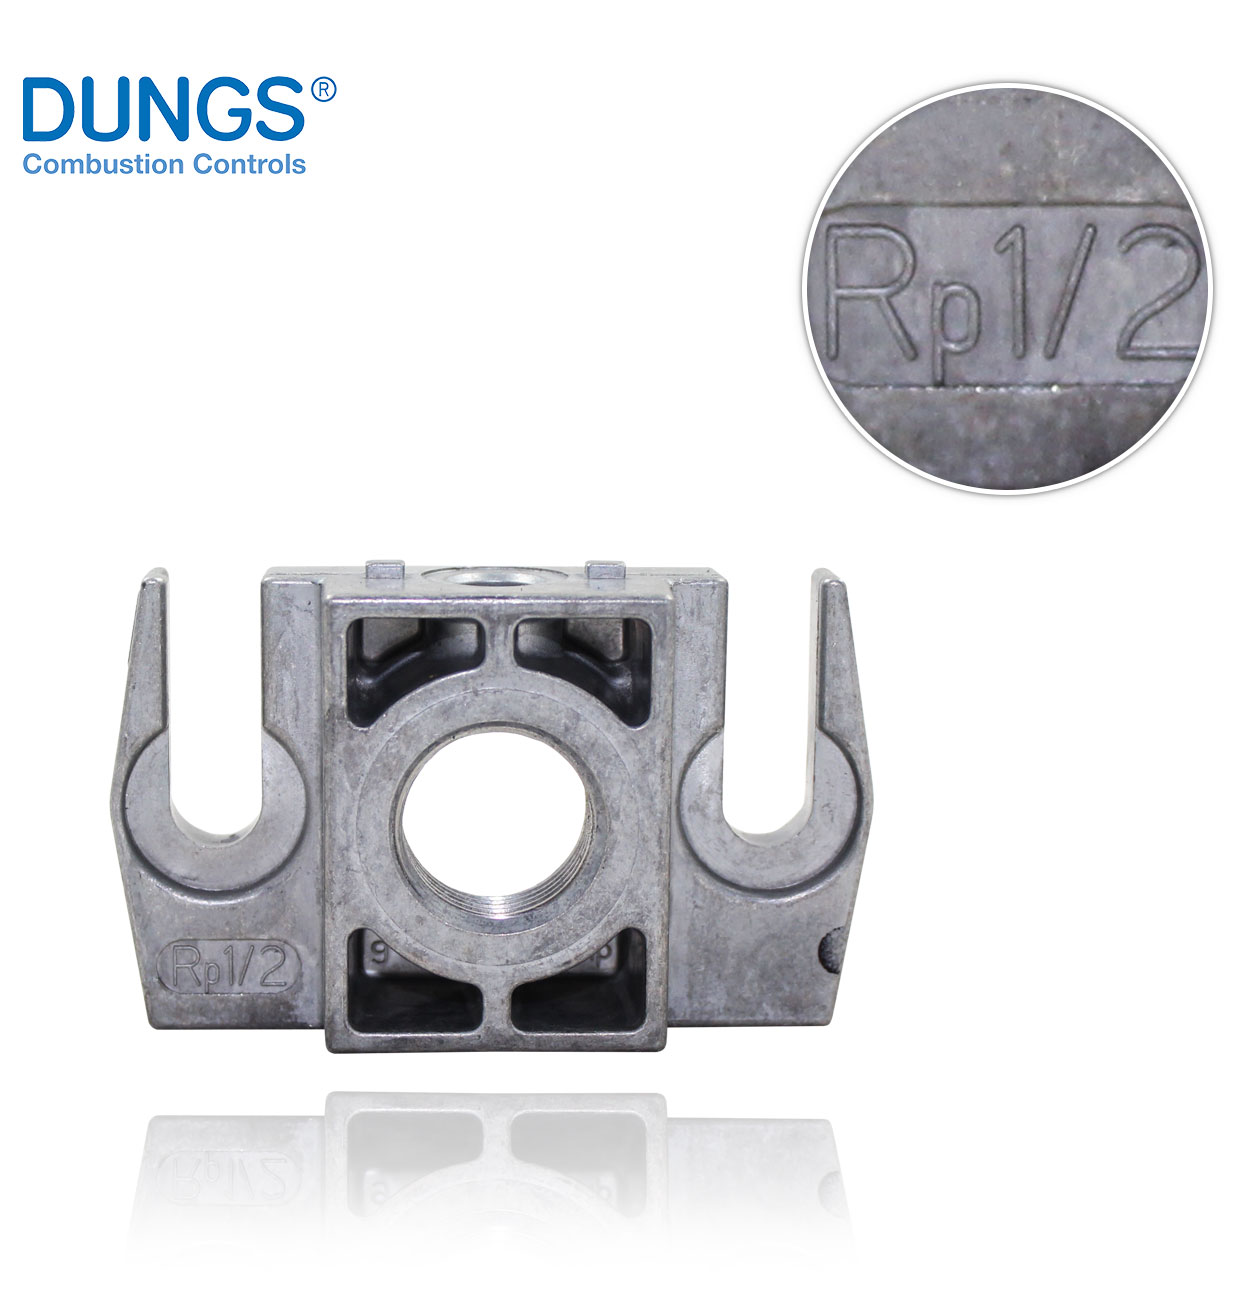 R1/2" DUNGS FLANGE WITH PLUG FOR MB405/407